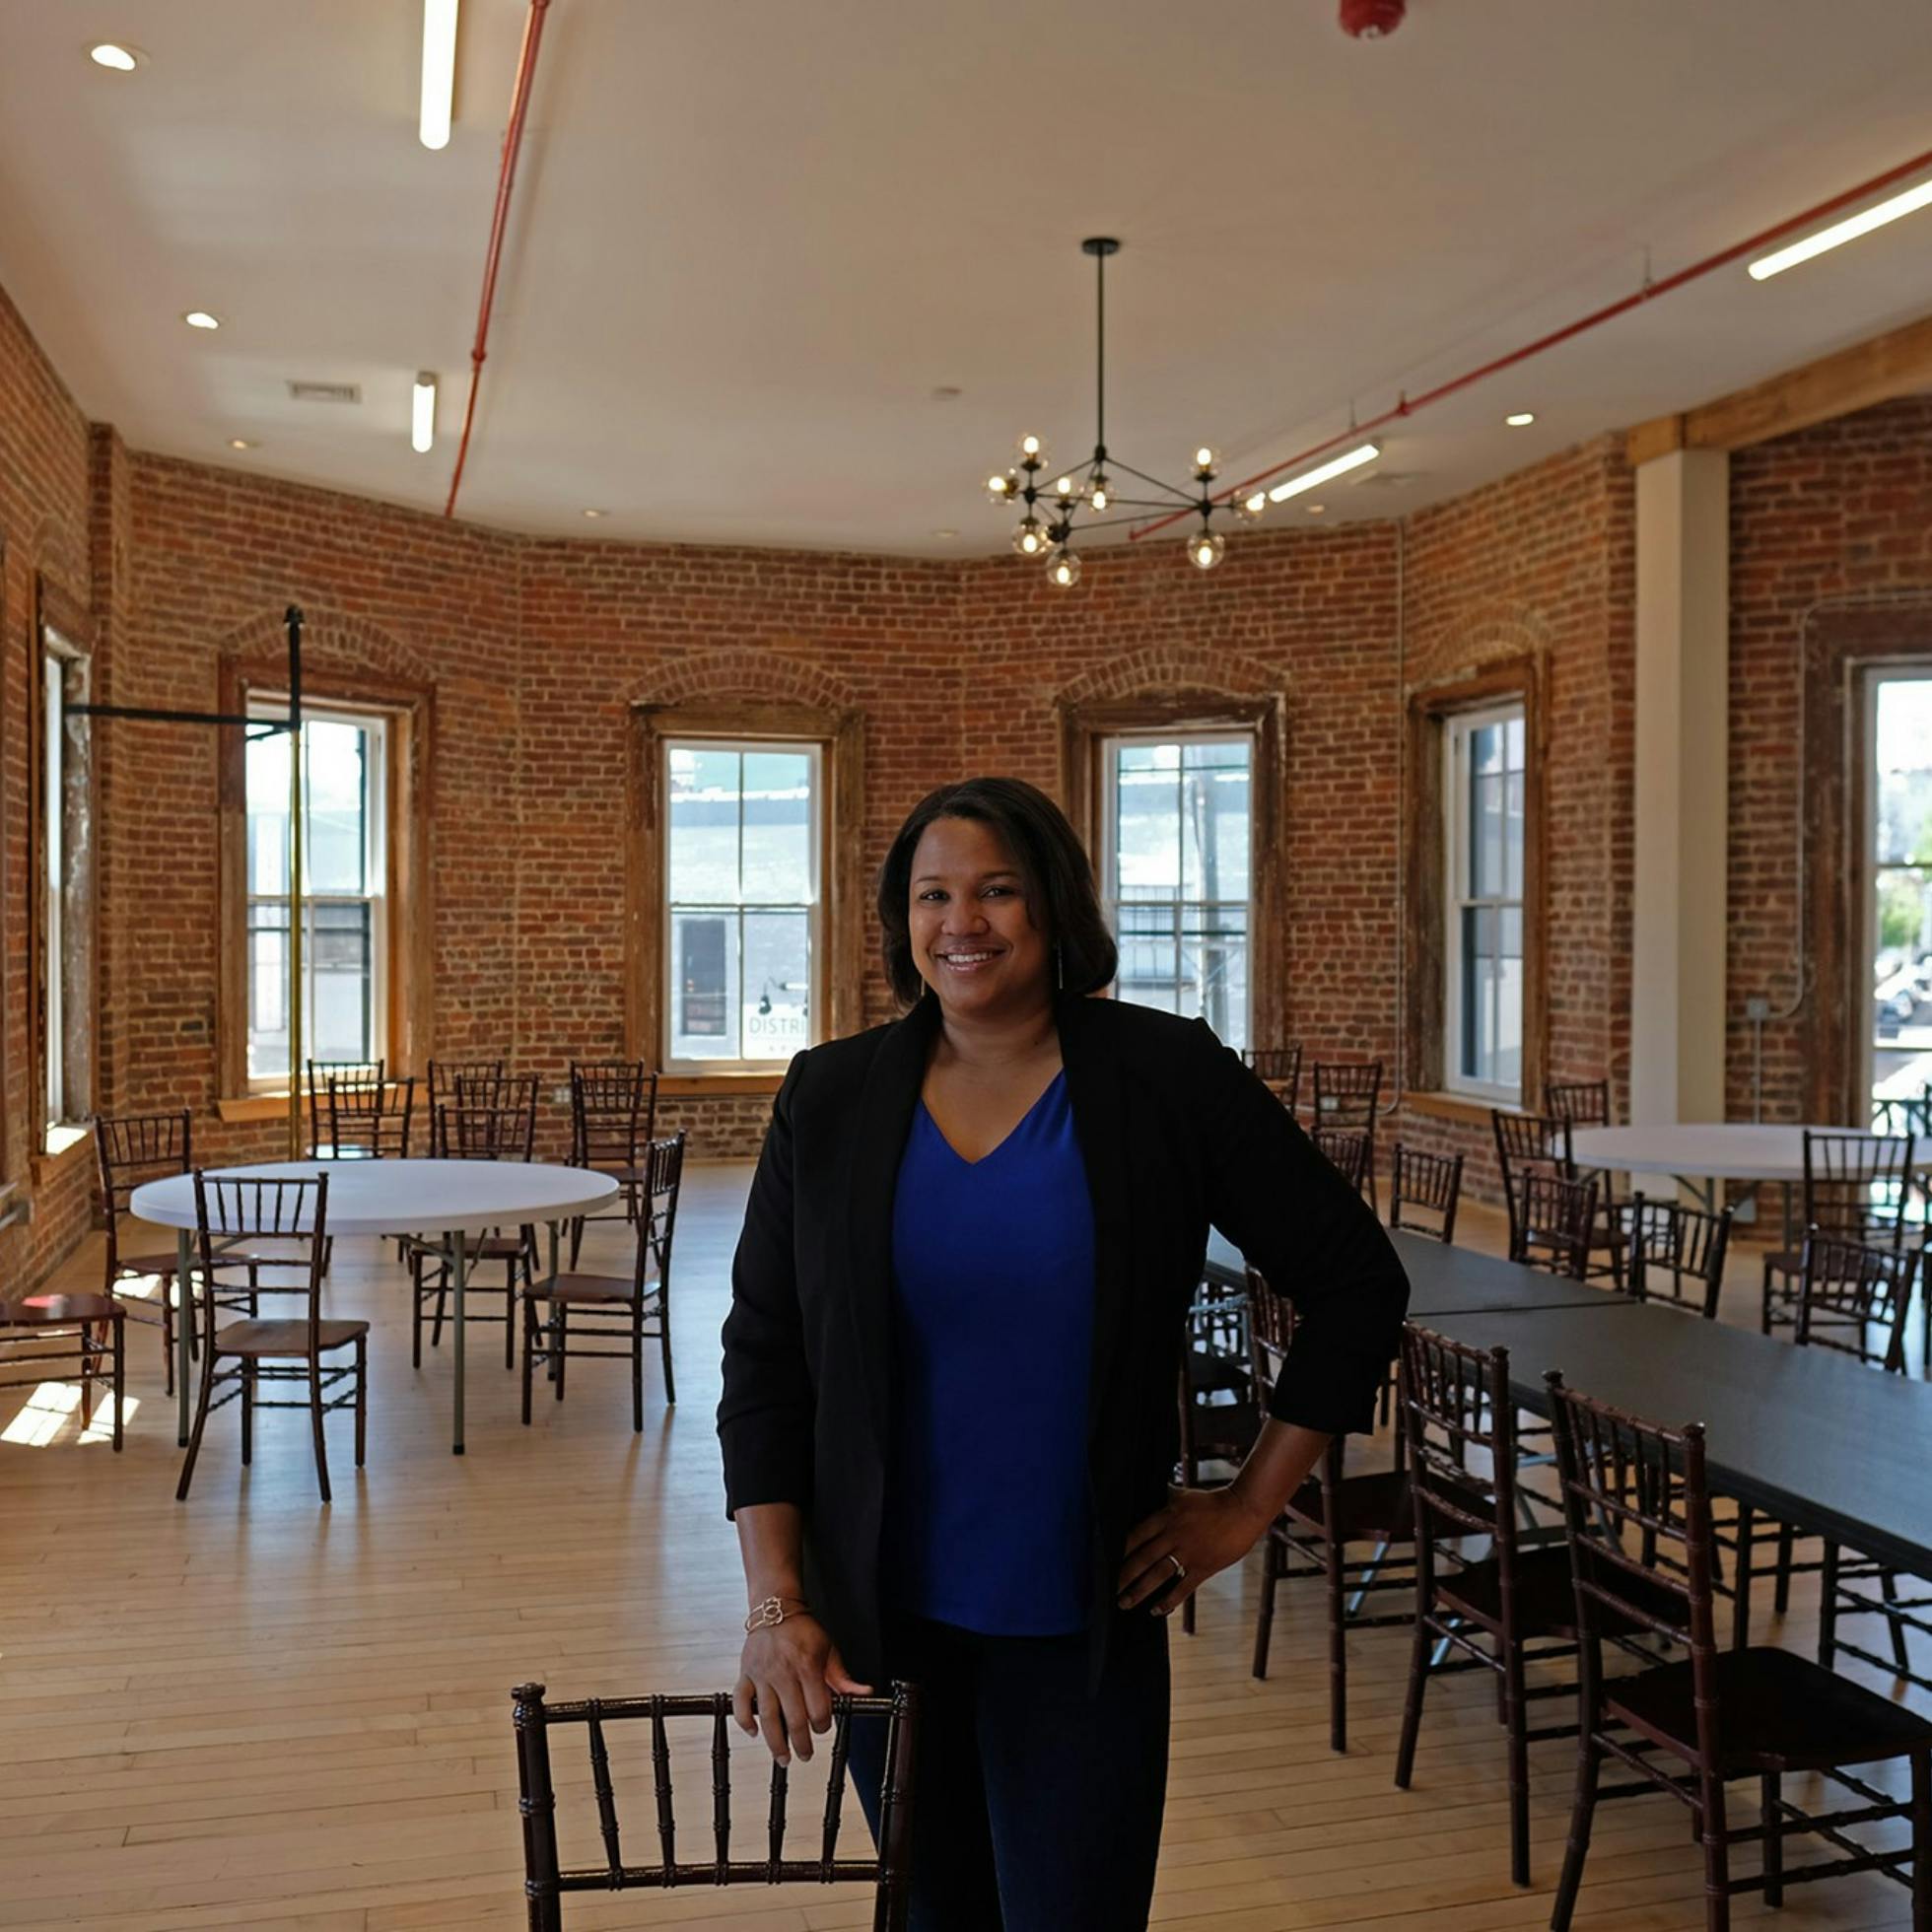 40 Black-Owned Businesses to Check Out in Downtown Richmond